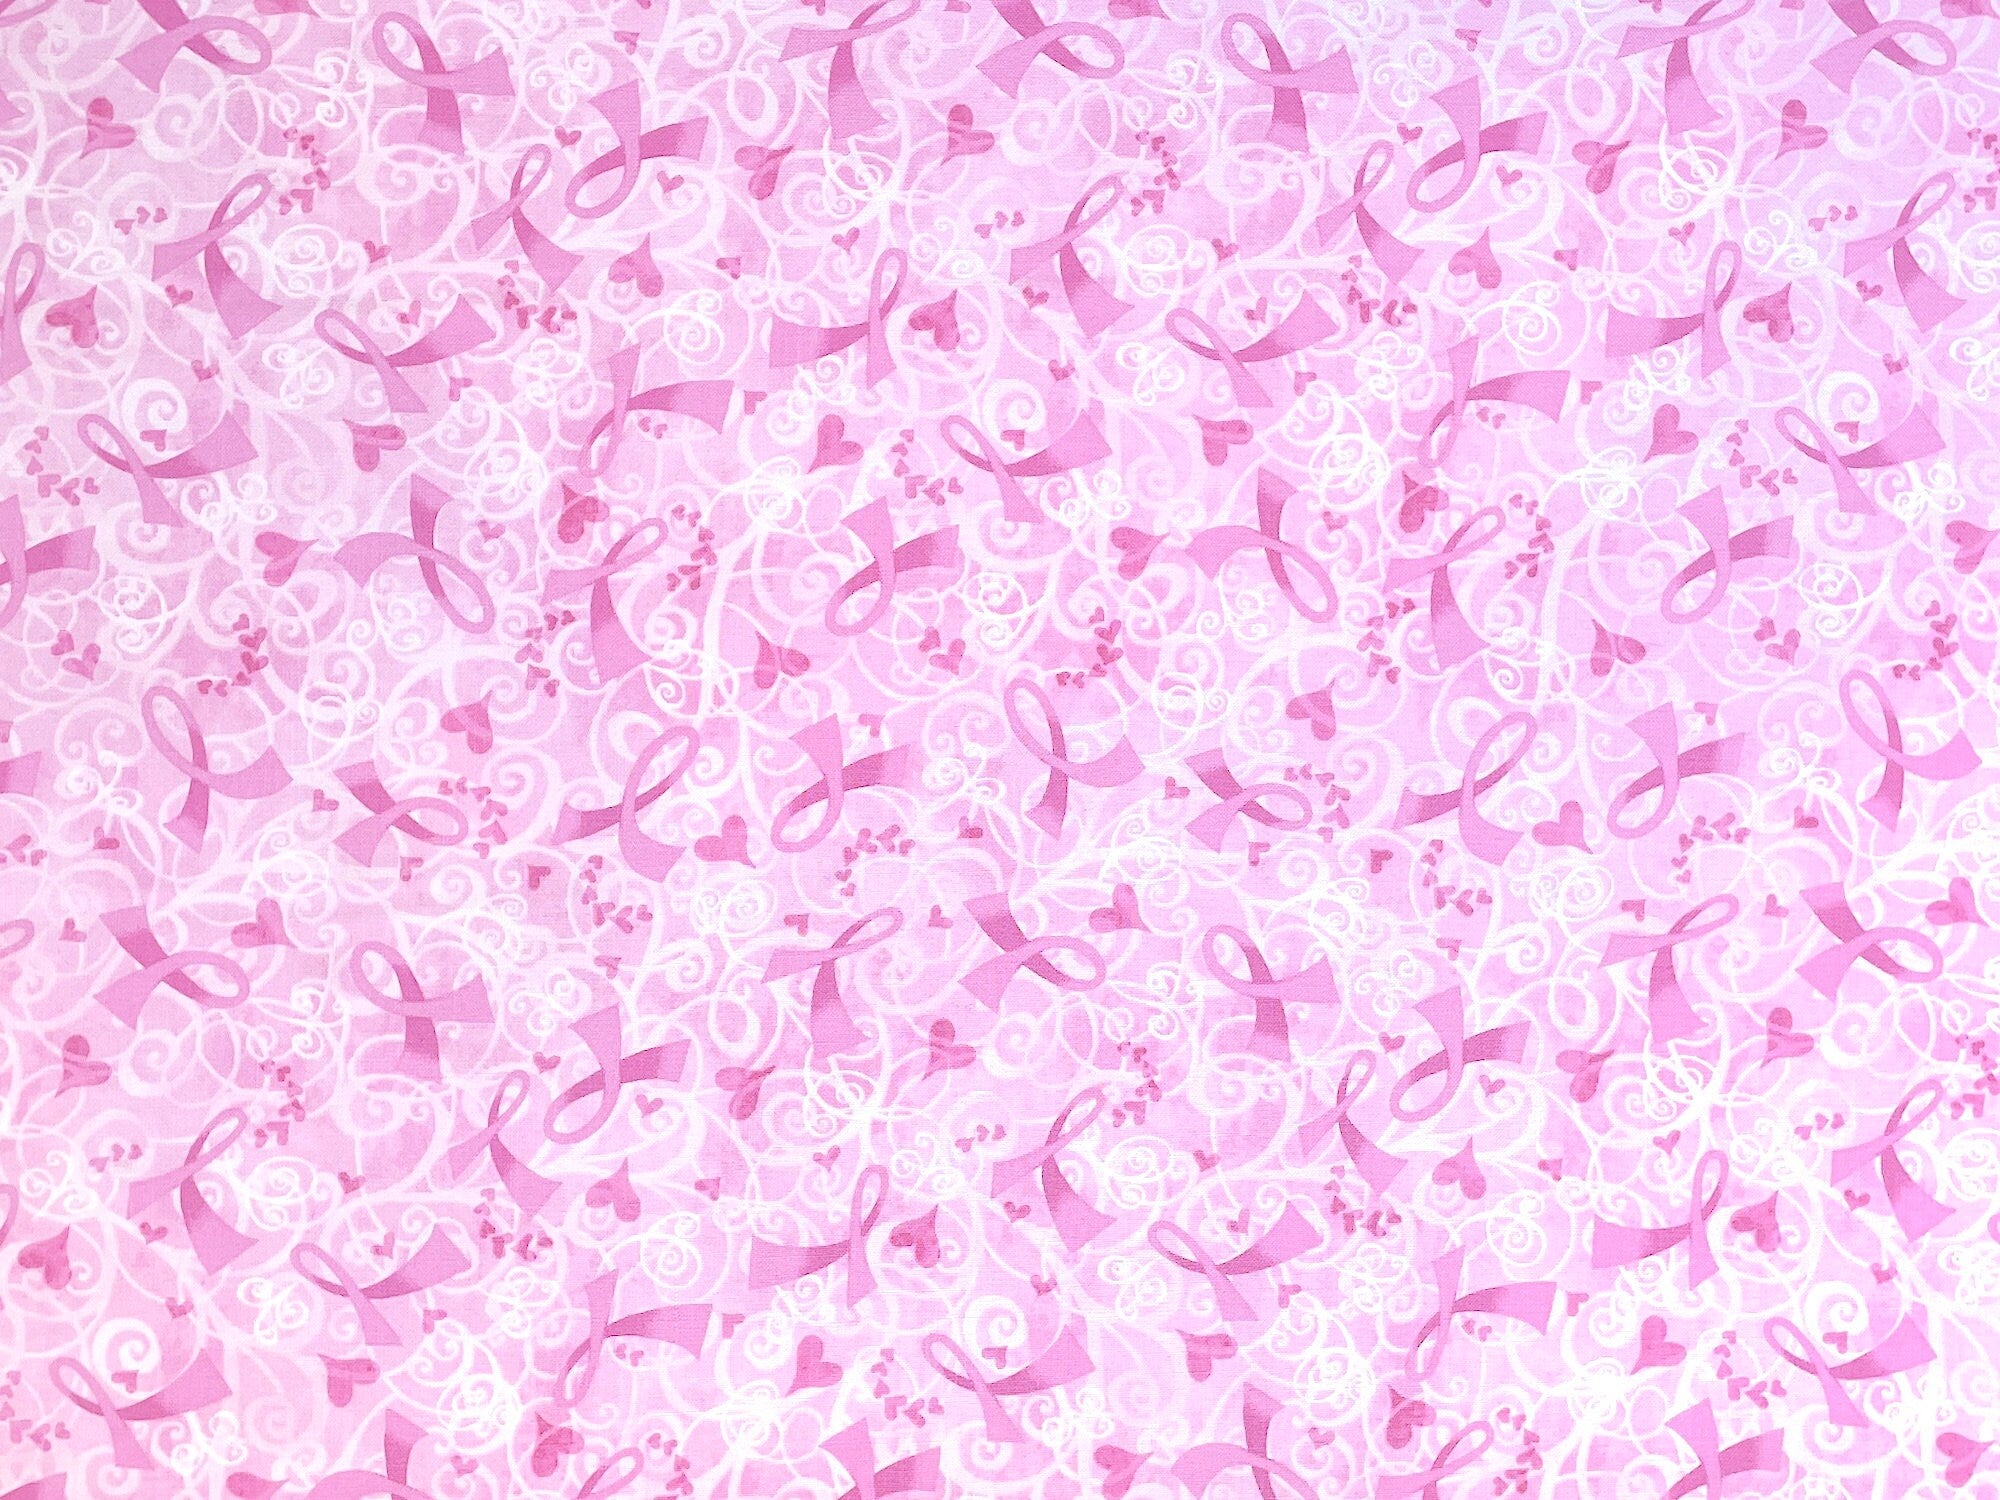 This pink awareness fabric is covered with pink ribbons and white scrolls.